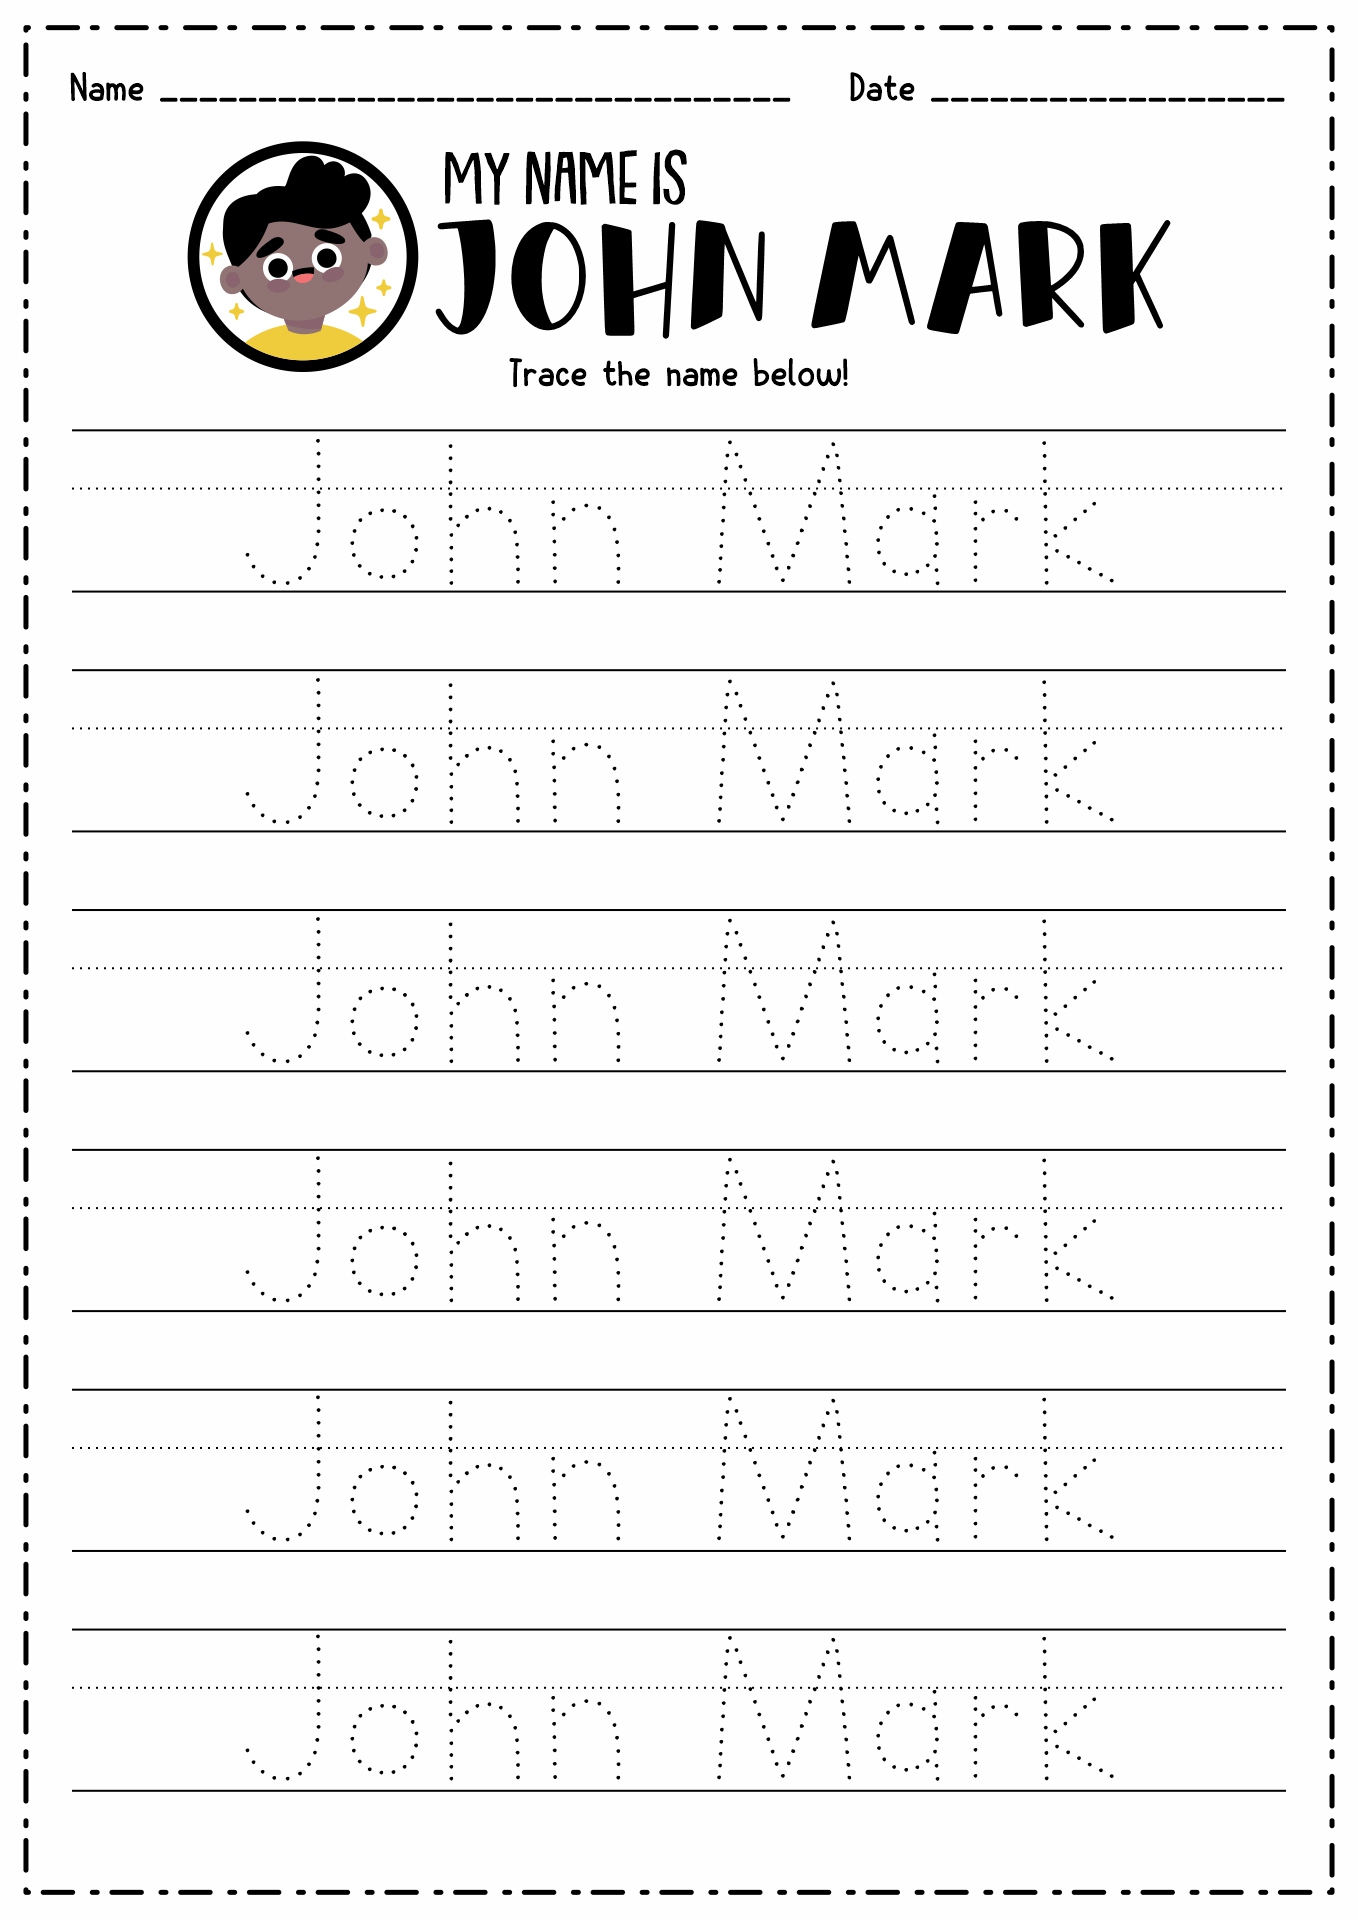 customized-name-tracing-worksheets